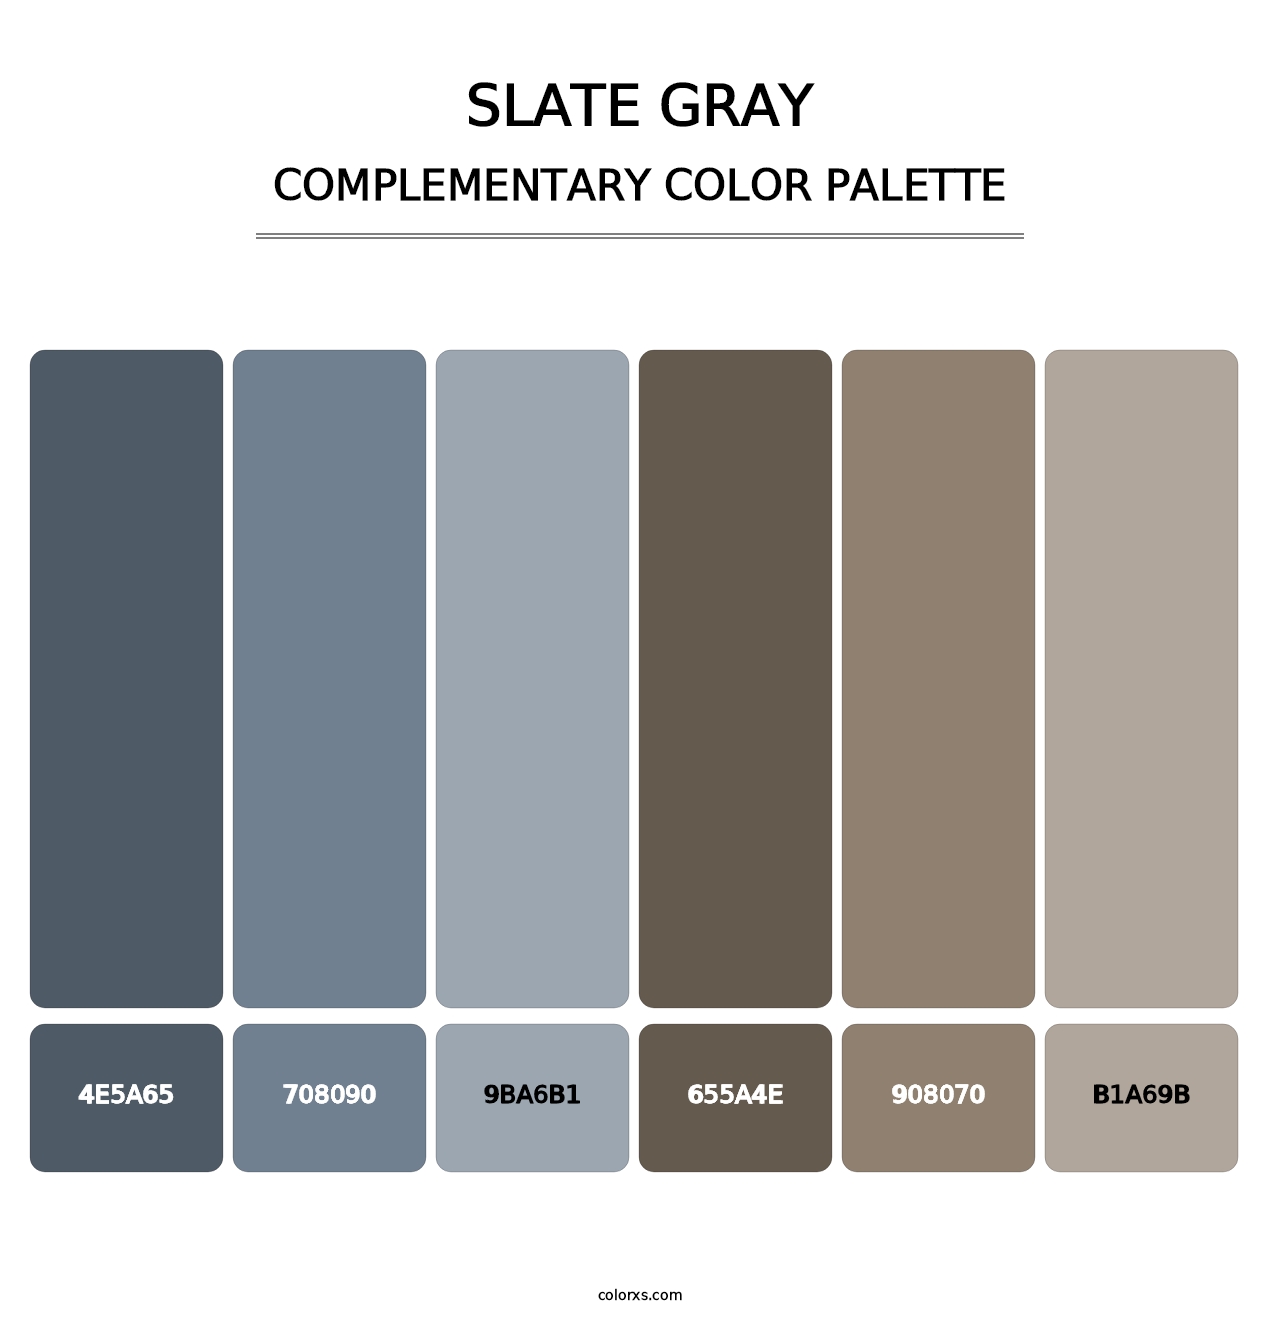 Slate Gray - Complementary Color Palette